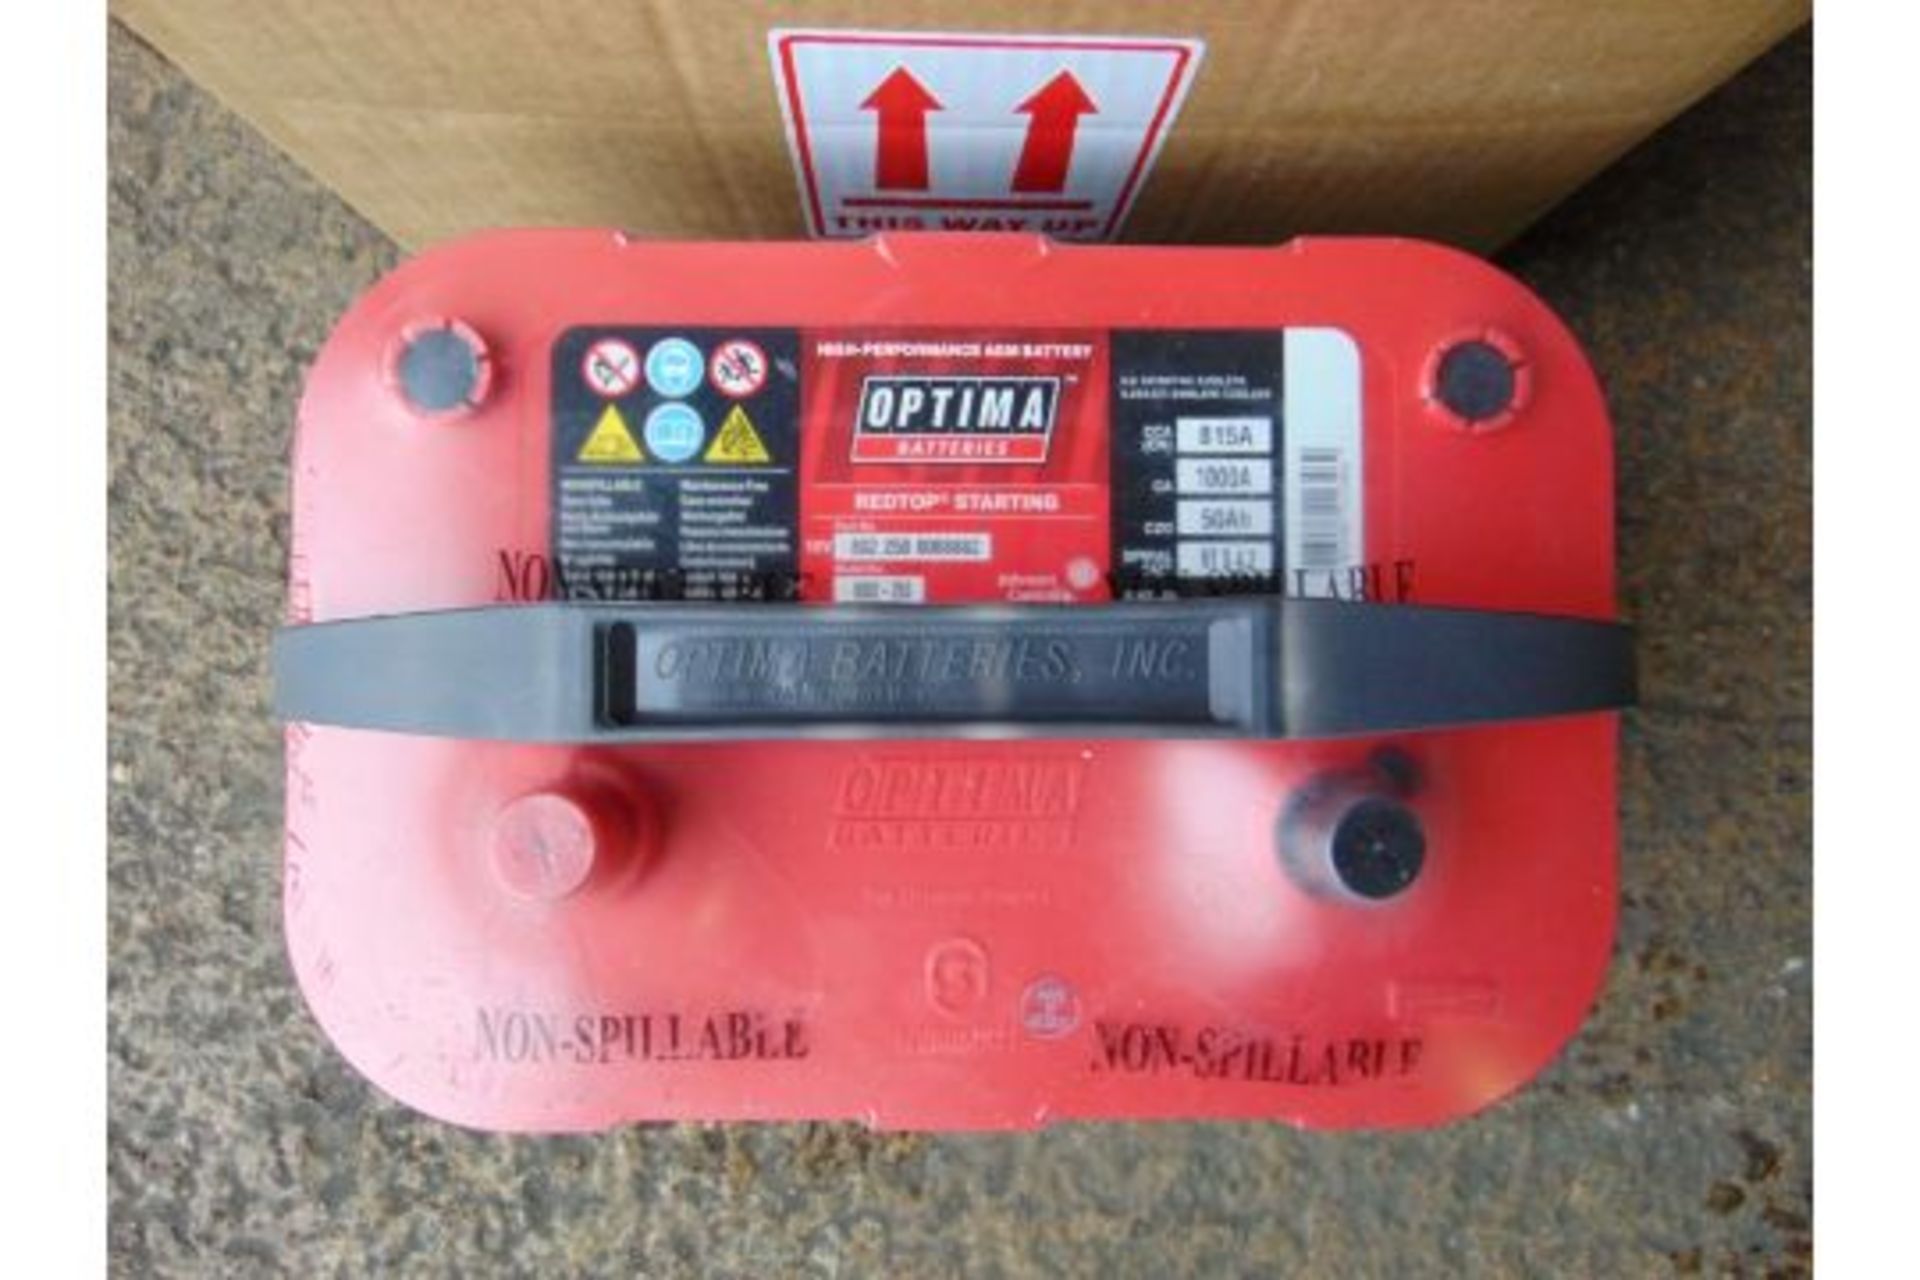 2X UNISSUED RTS 4.2 OPTIMA RED TOP 12 V STARTING BATTERIIES - (8002-250) RTS4.2 AGM - Bild 3 aus 3